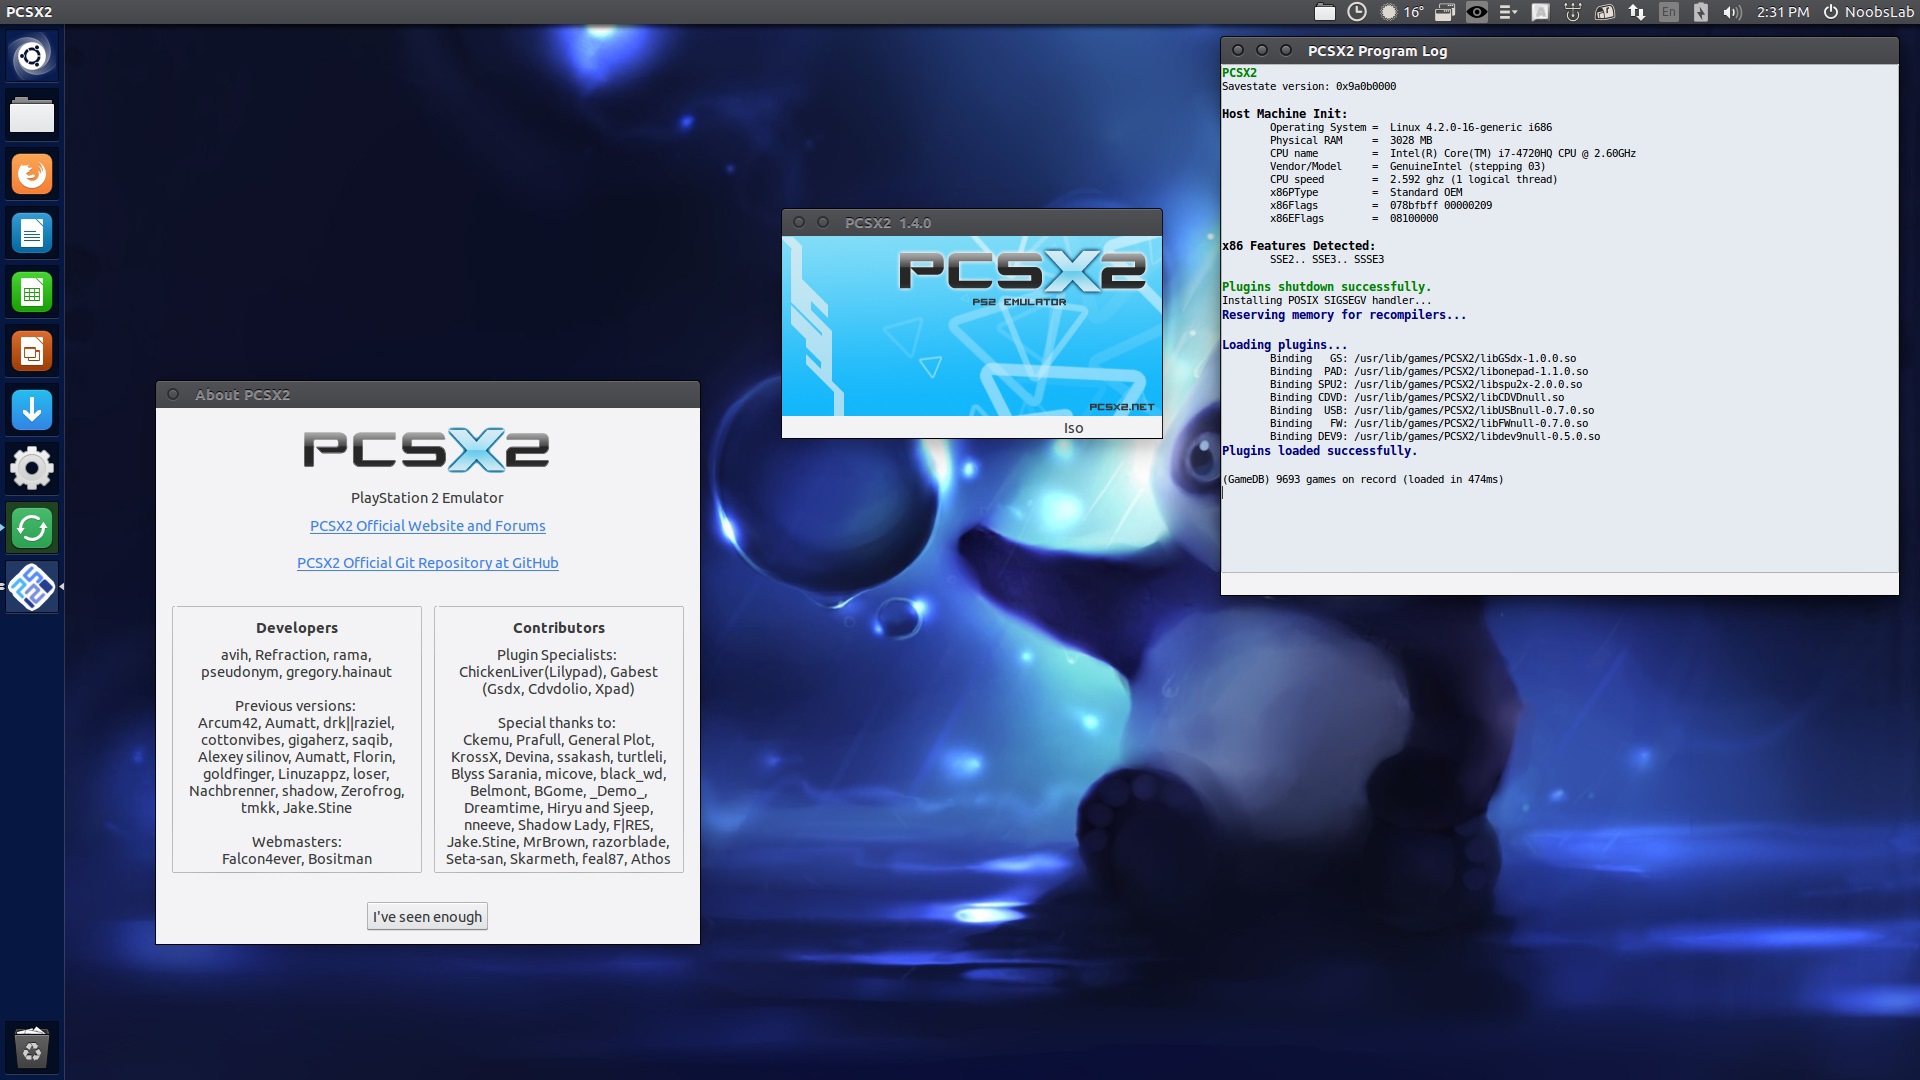 How to Play PS2 Games on PC Using PCSX2 [With Pictures] - MiniTool